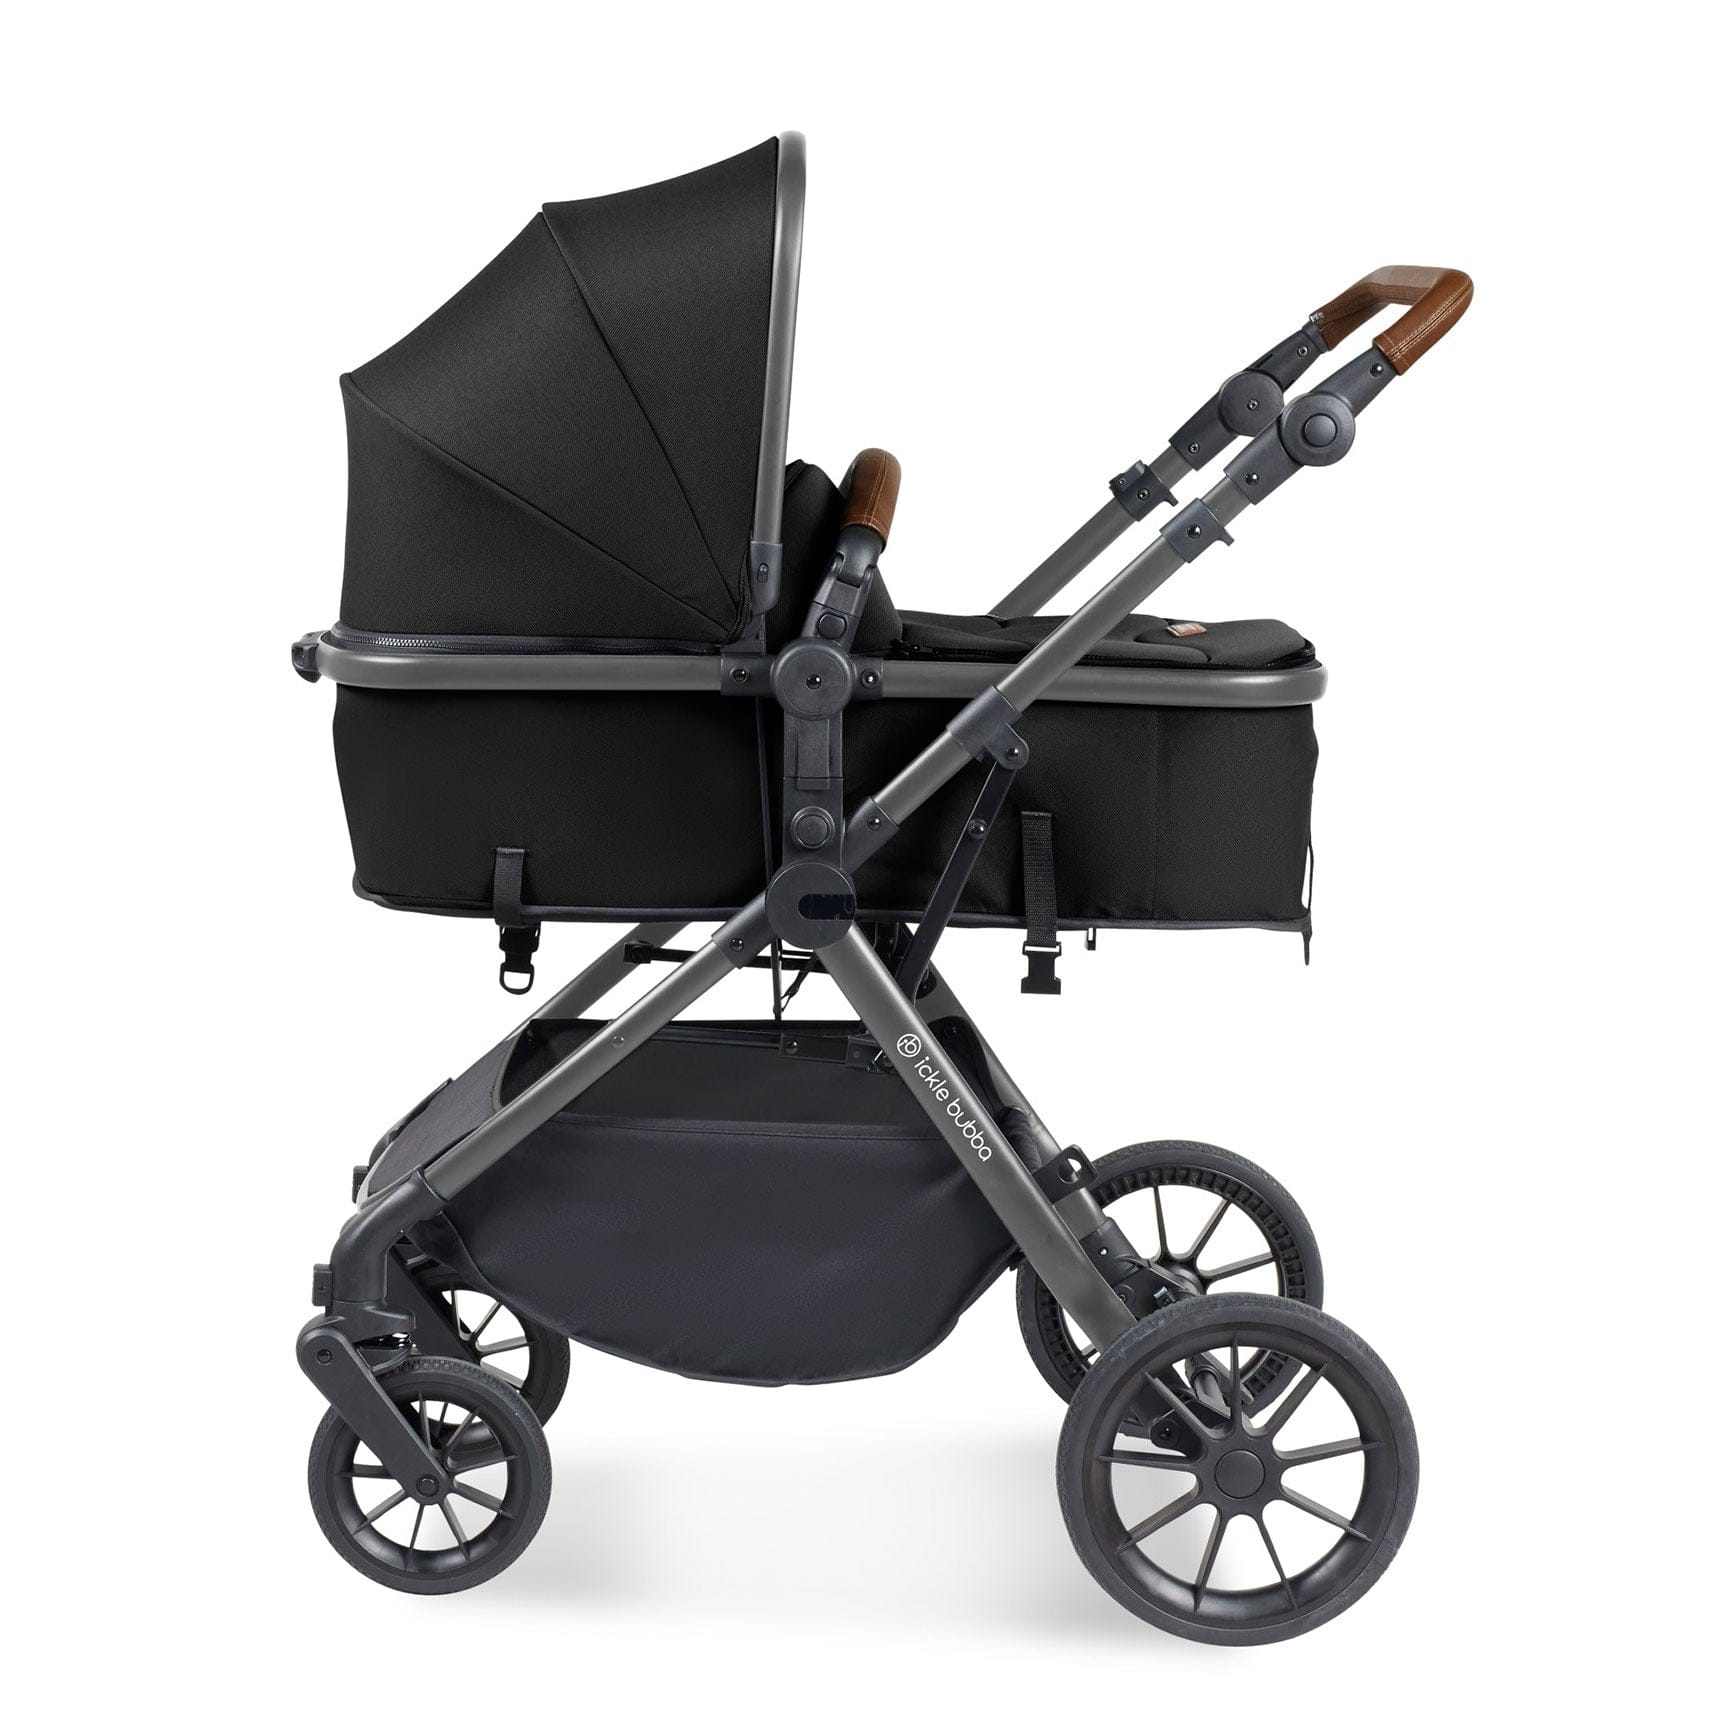 Ickle Bubba Ickle Bubba Cosmo 2 in 1 Plus Carrycot & Pushchair in Gun metal/Black Travel Systems 10-007-001-135 5056515025613